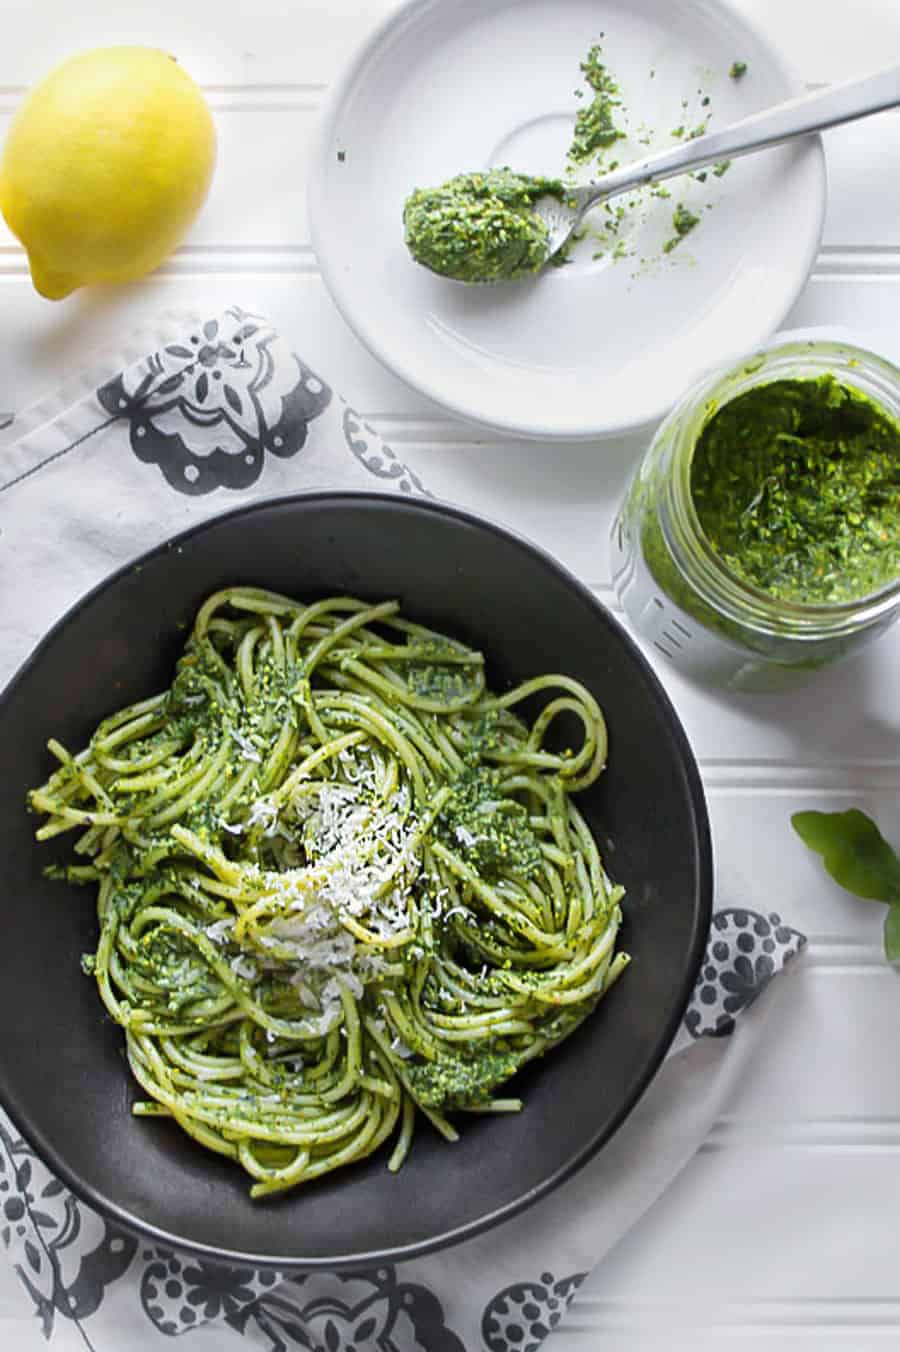 arugula pesto in a black bowl with a lemon on the side and jar of pesto